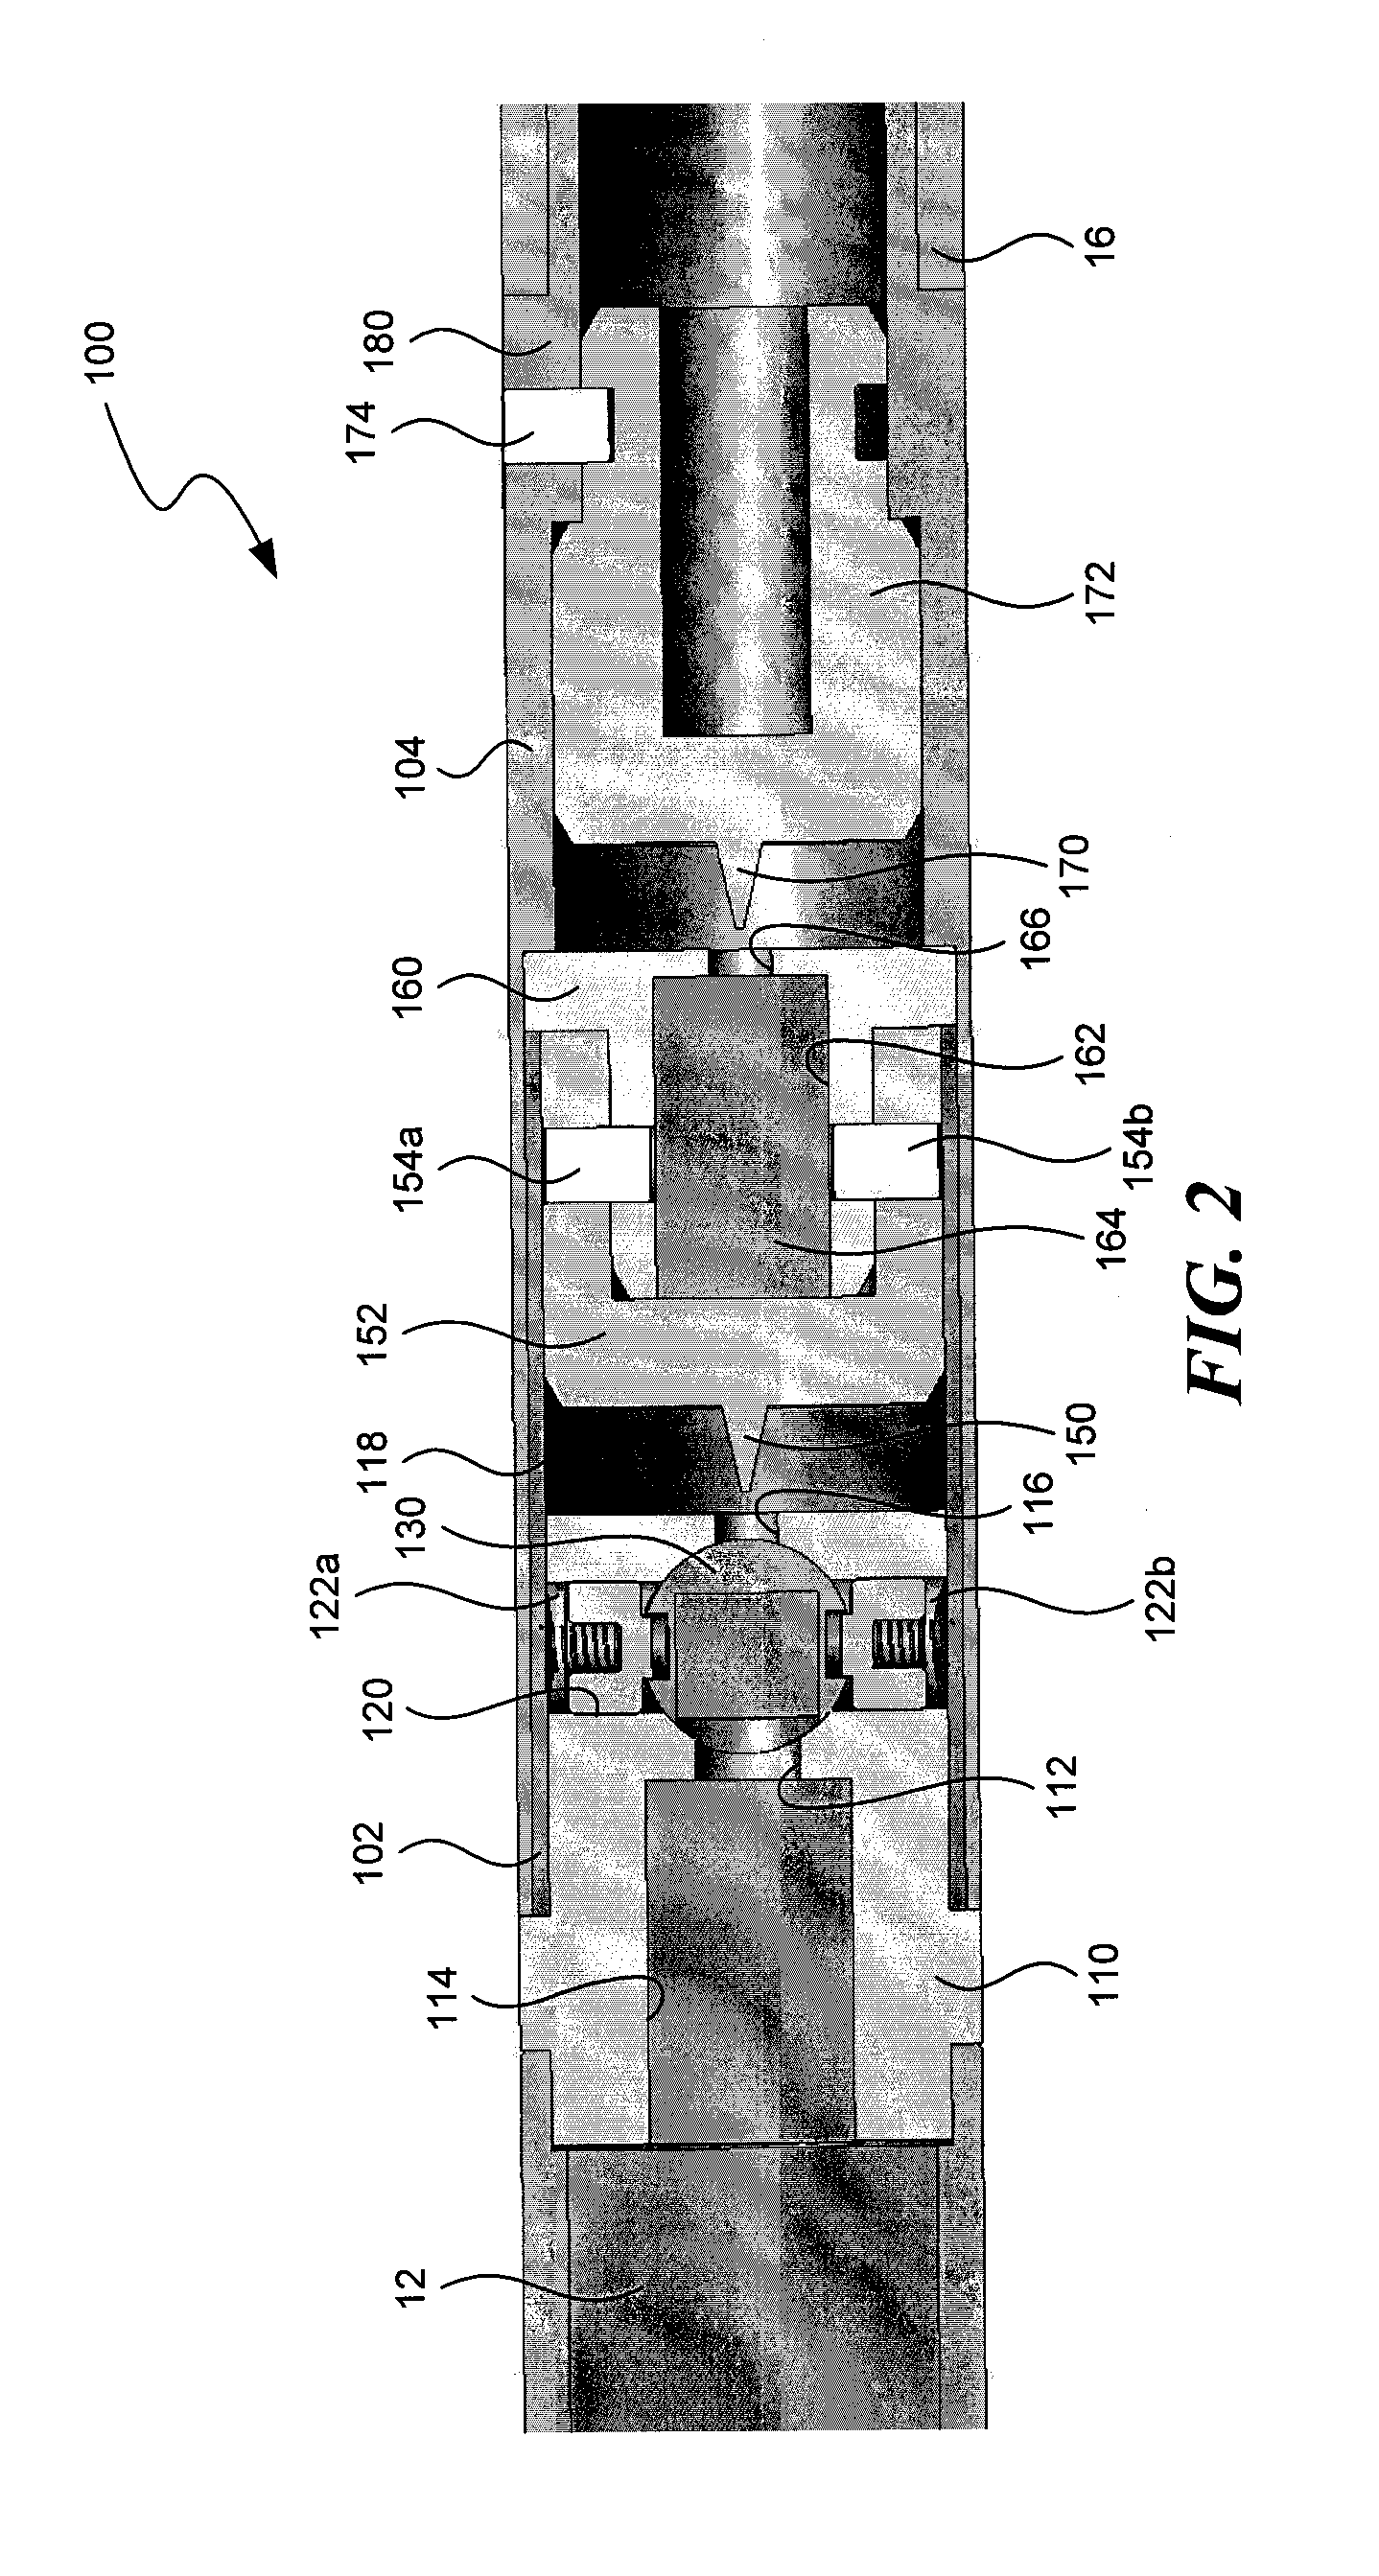 Safe and arm mechanisms and methods for explosive devices